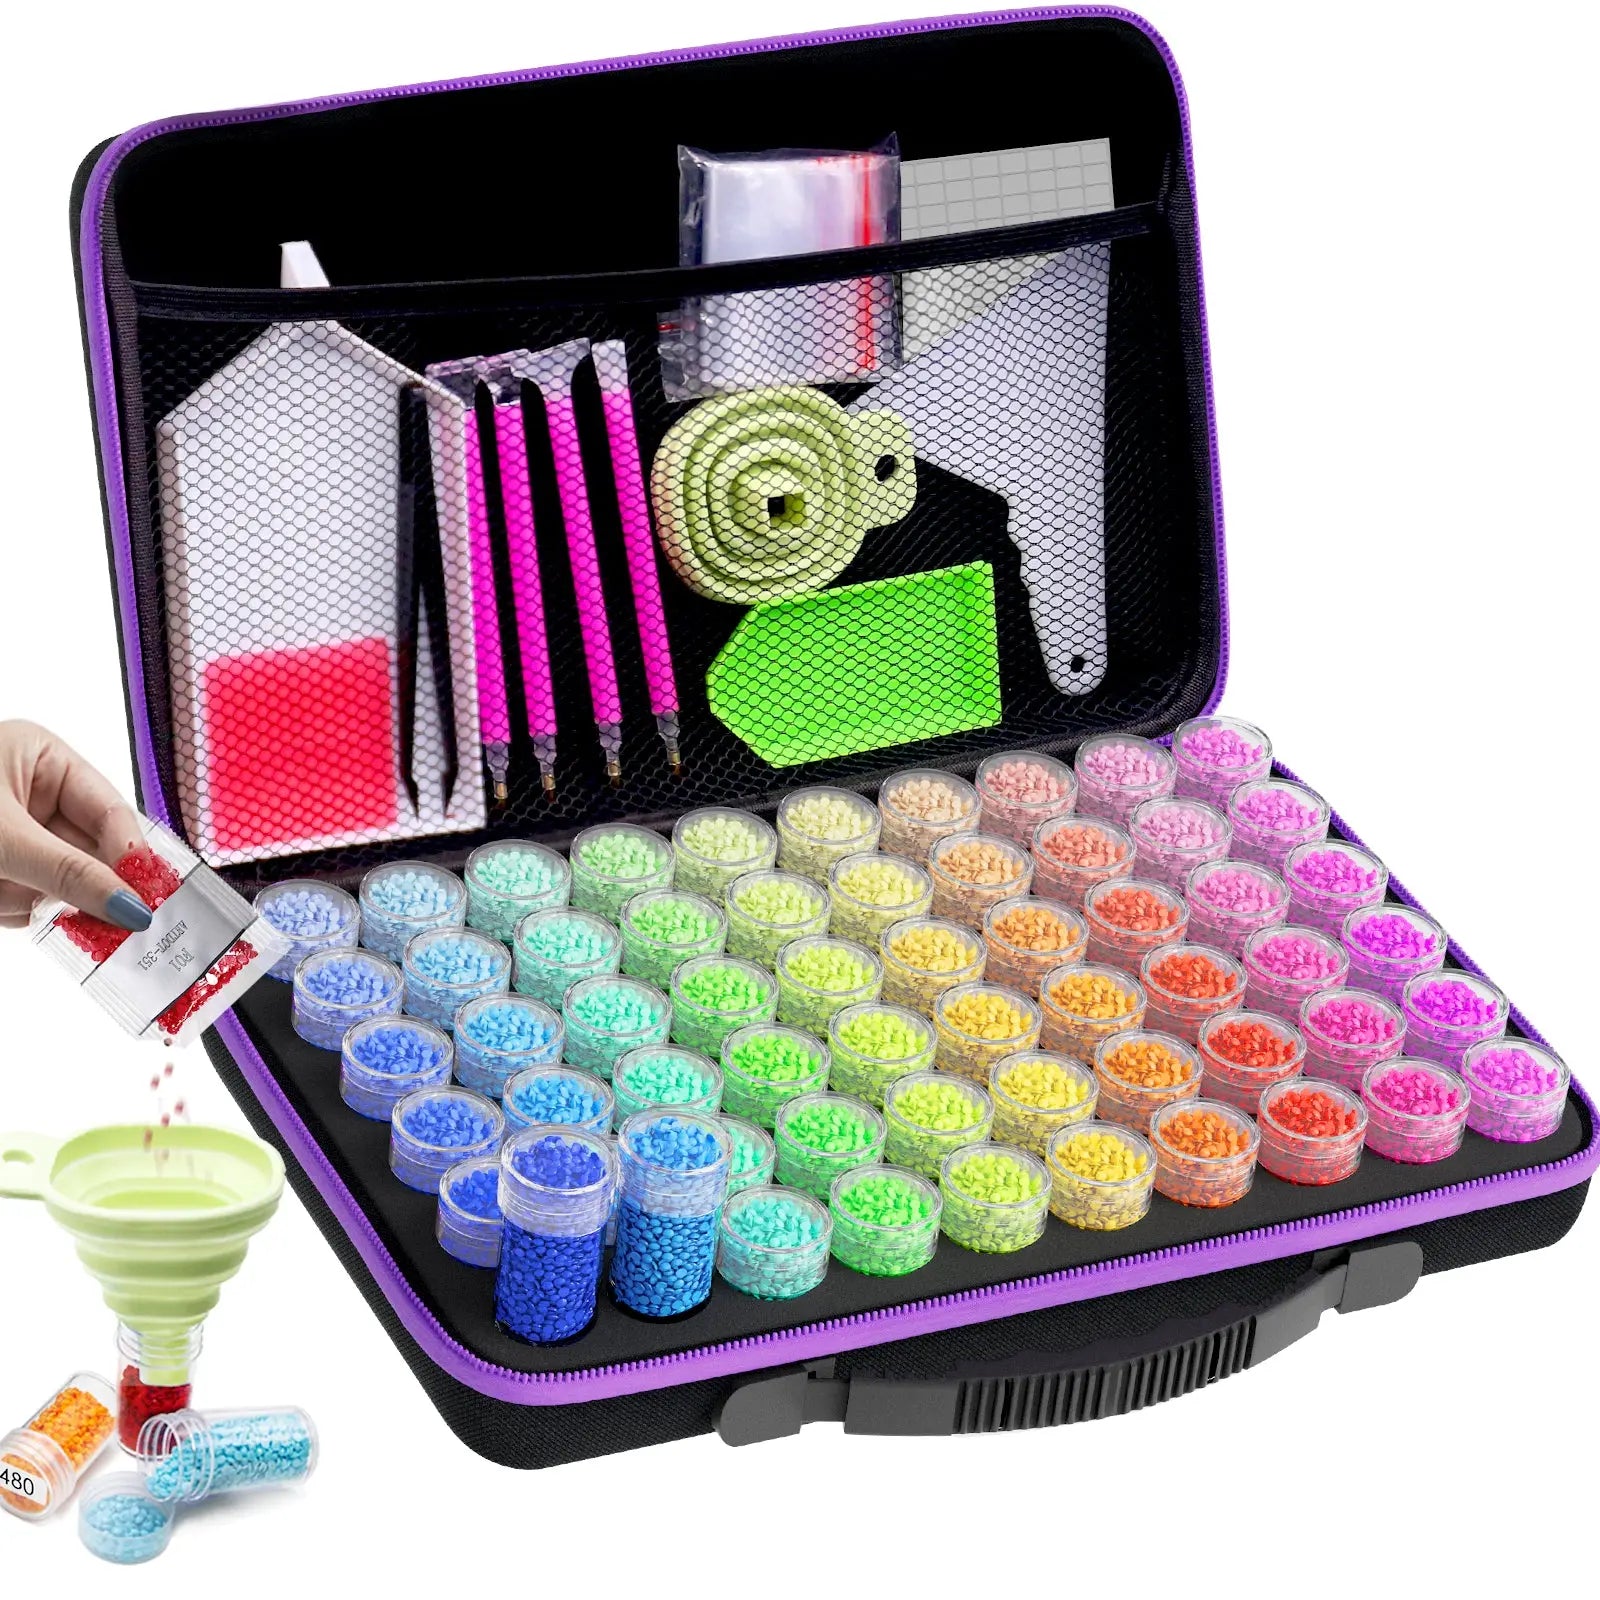 Best Overall Diamond Painting Storage Case for Diamond Accessory